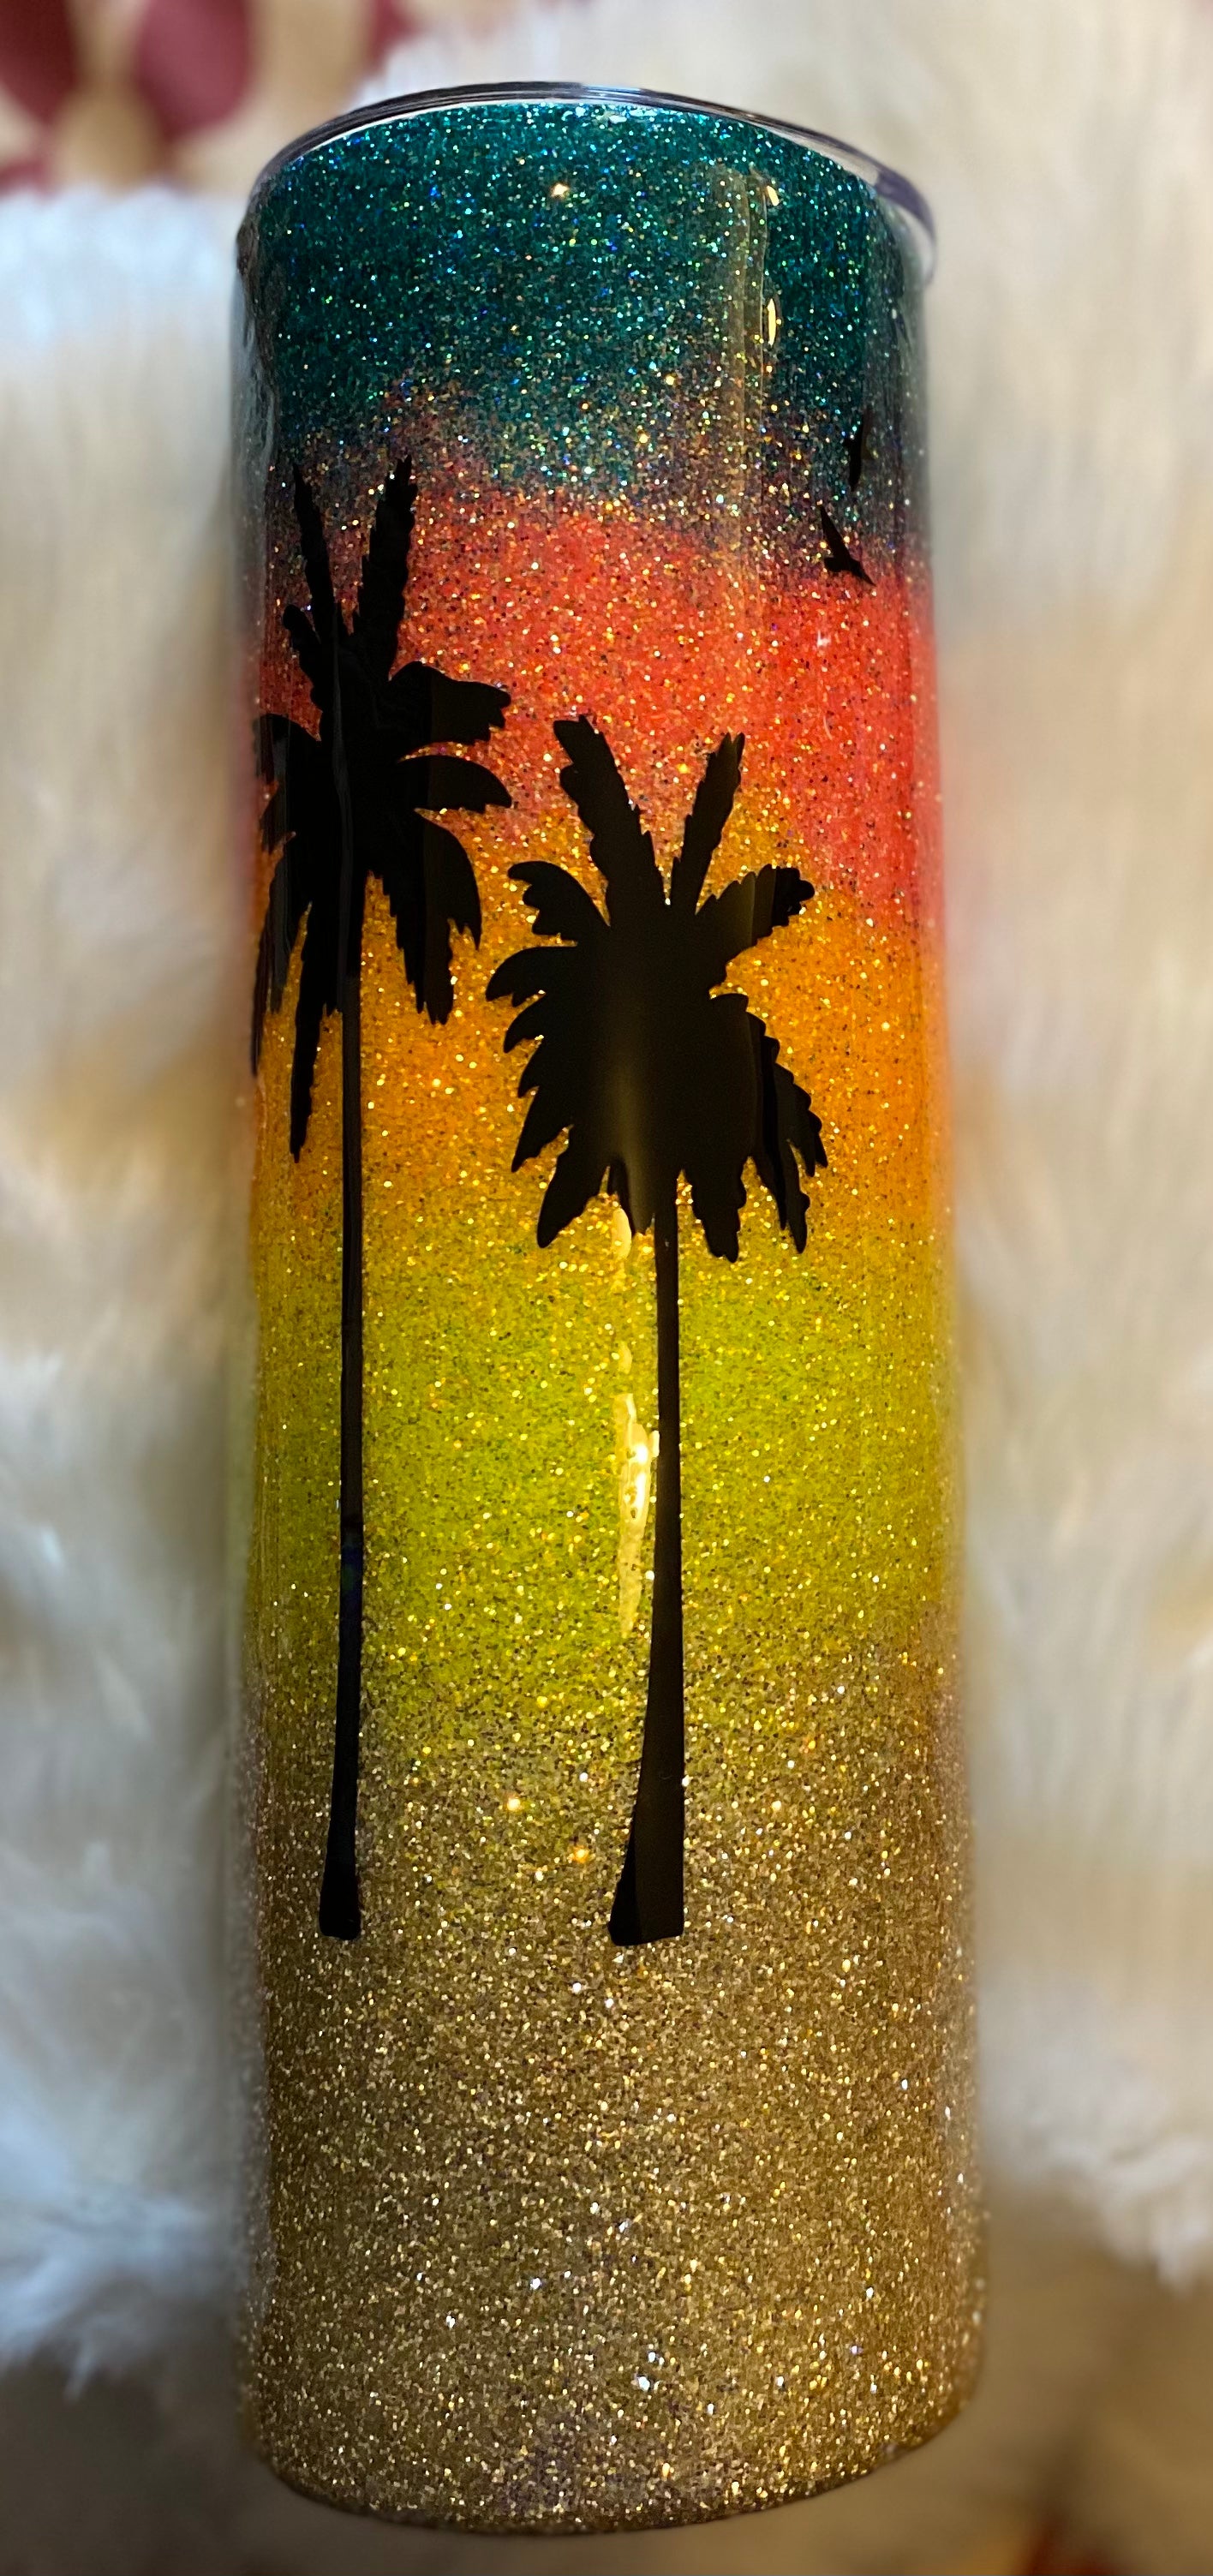 The “Grand Palm” 30 oz Double Wall Stainless Steel Beach Tumbler